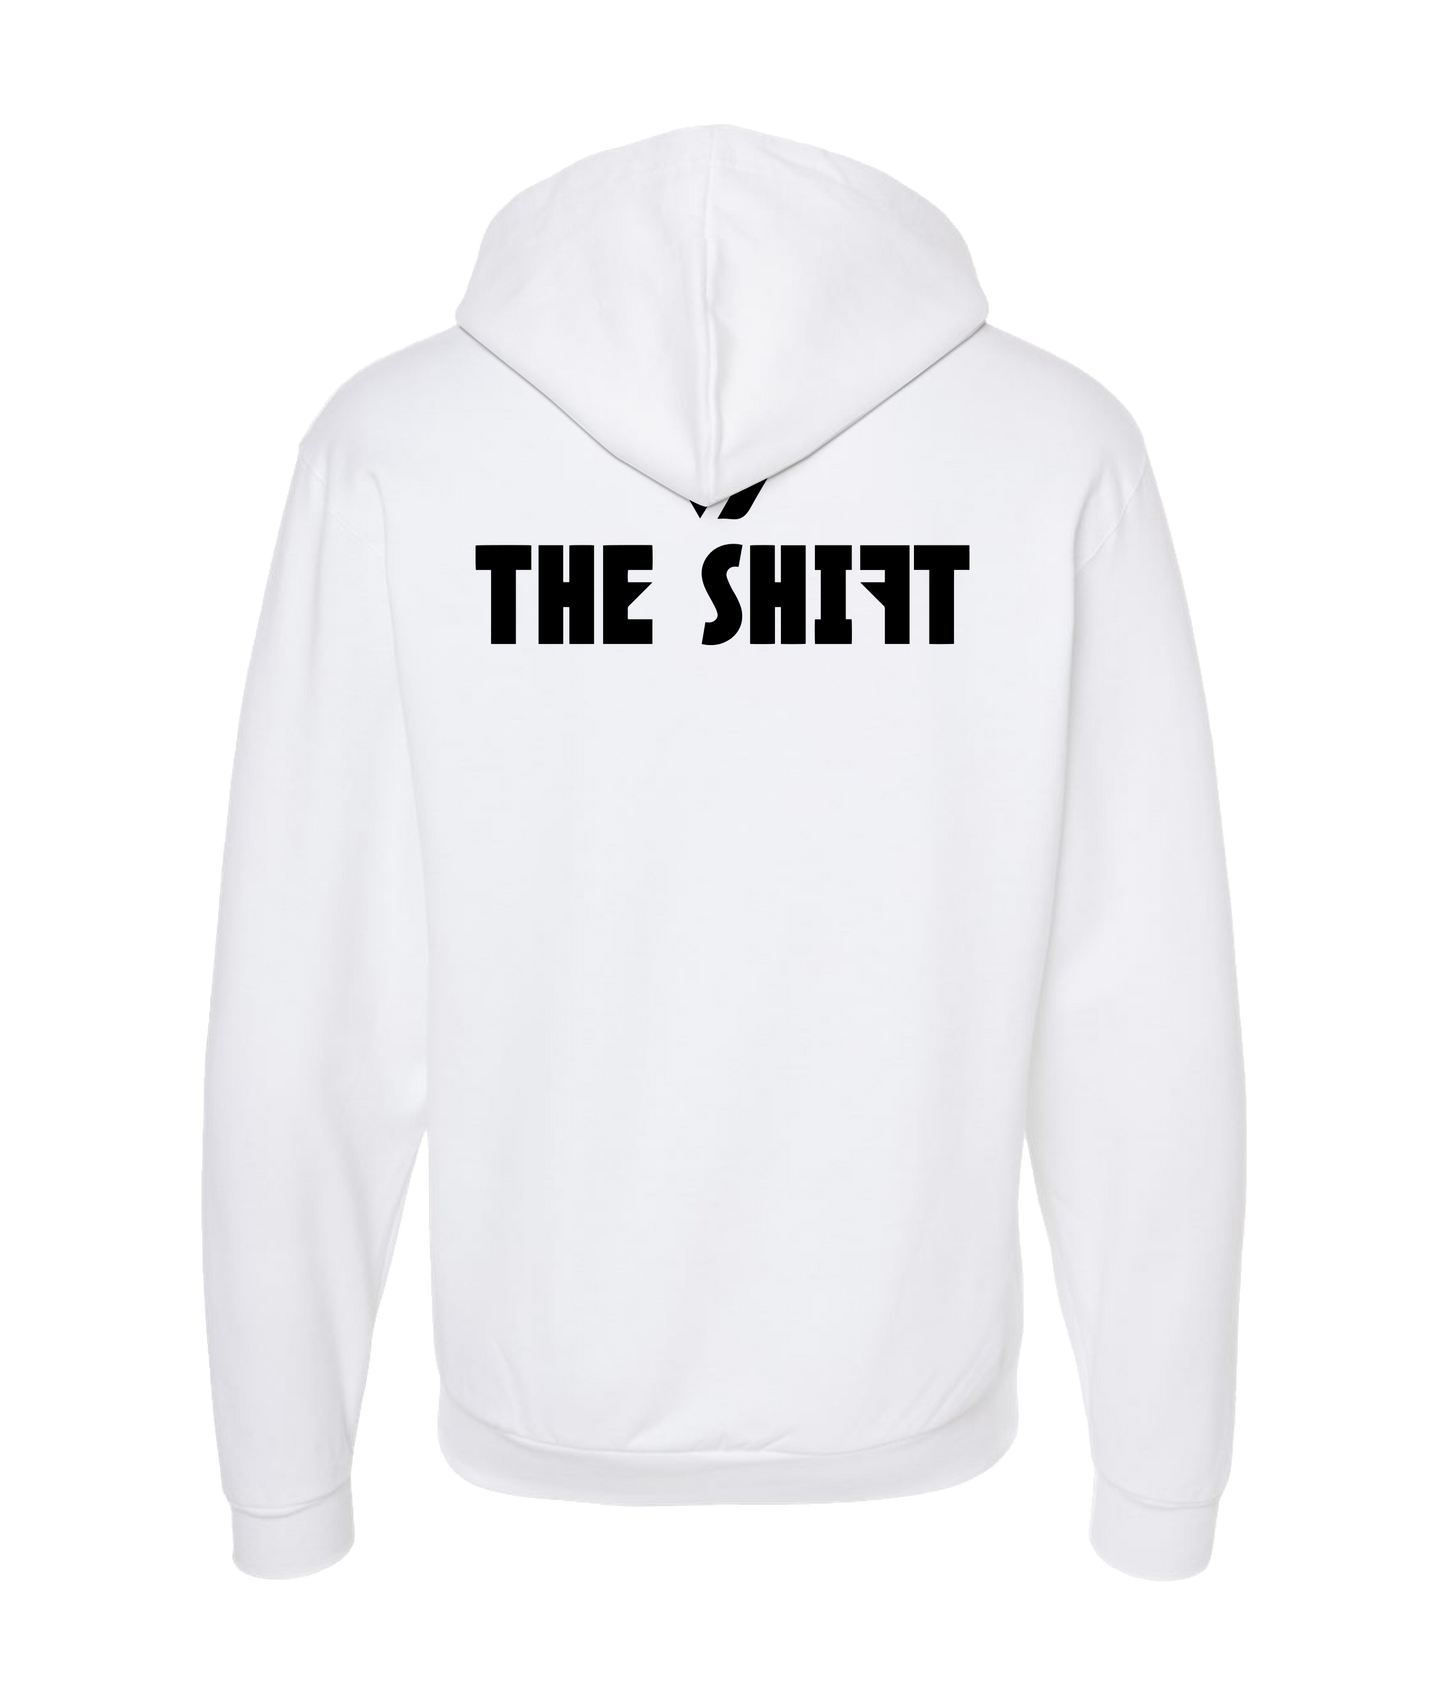 TheShift - Be The Shift - White Zip Up Hoodie